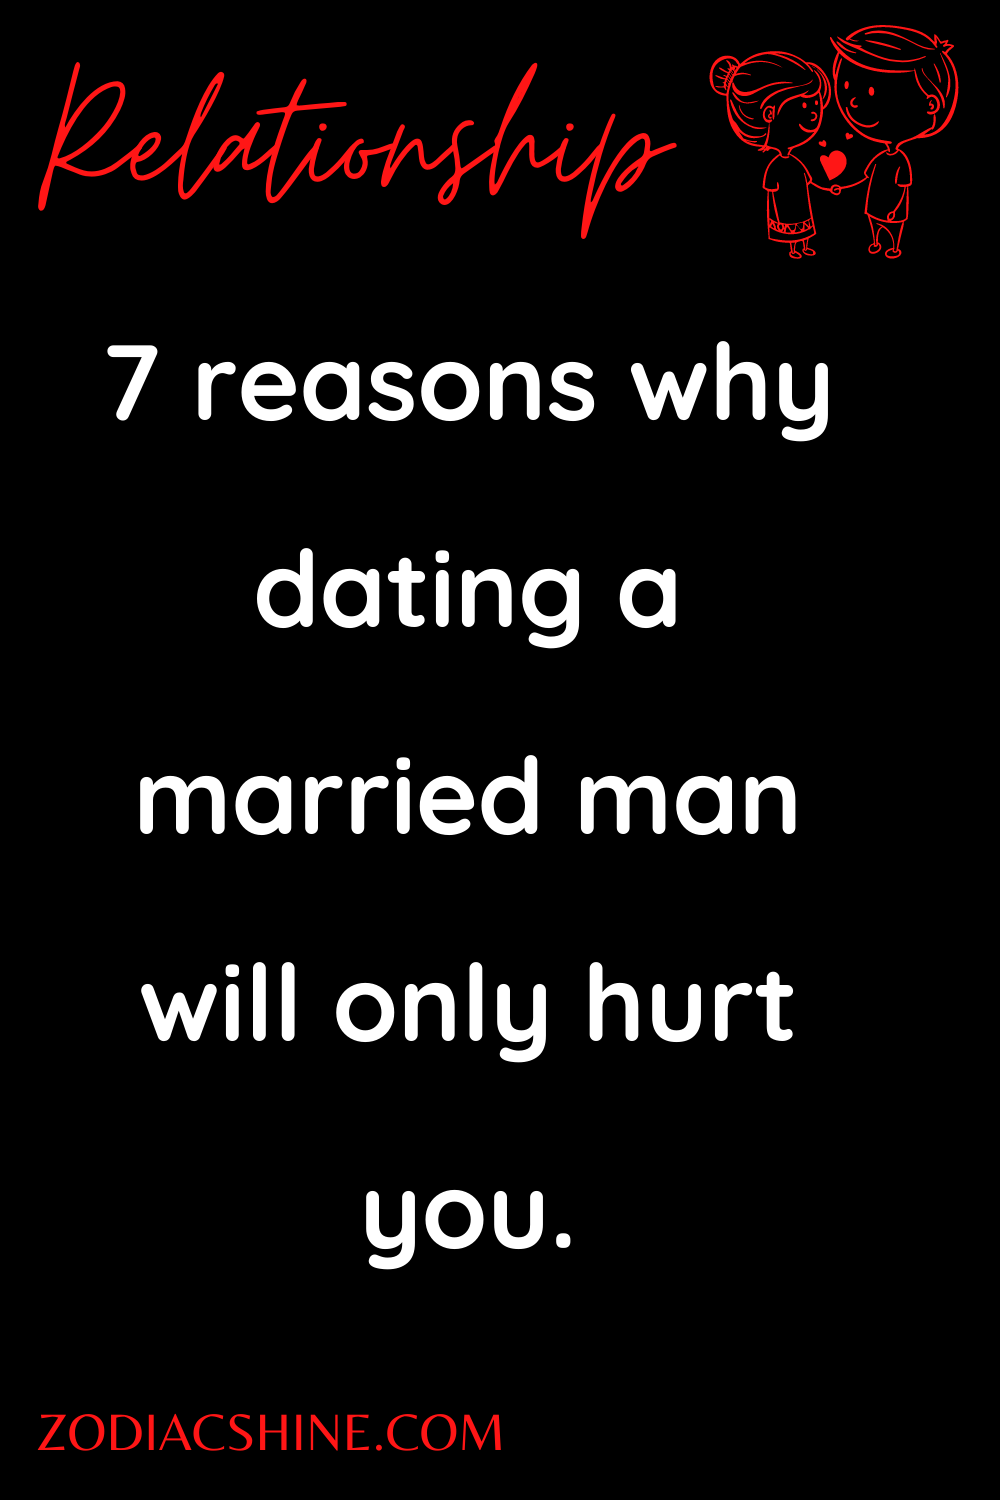 7 reasons why dating a married man will only hurt you.